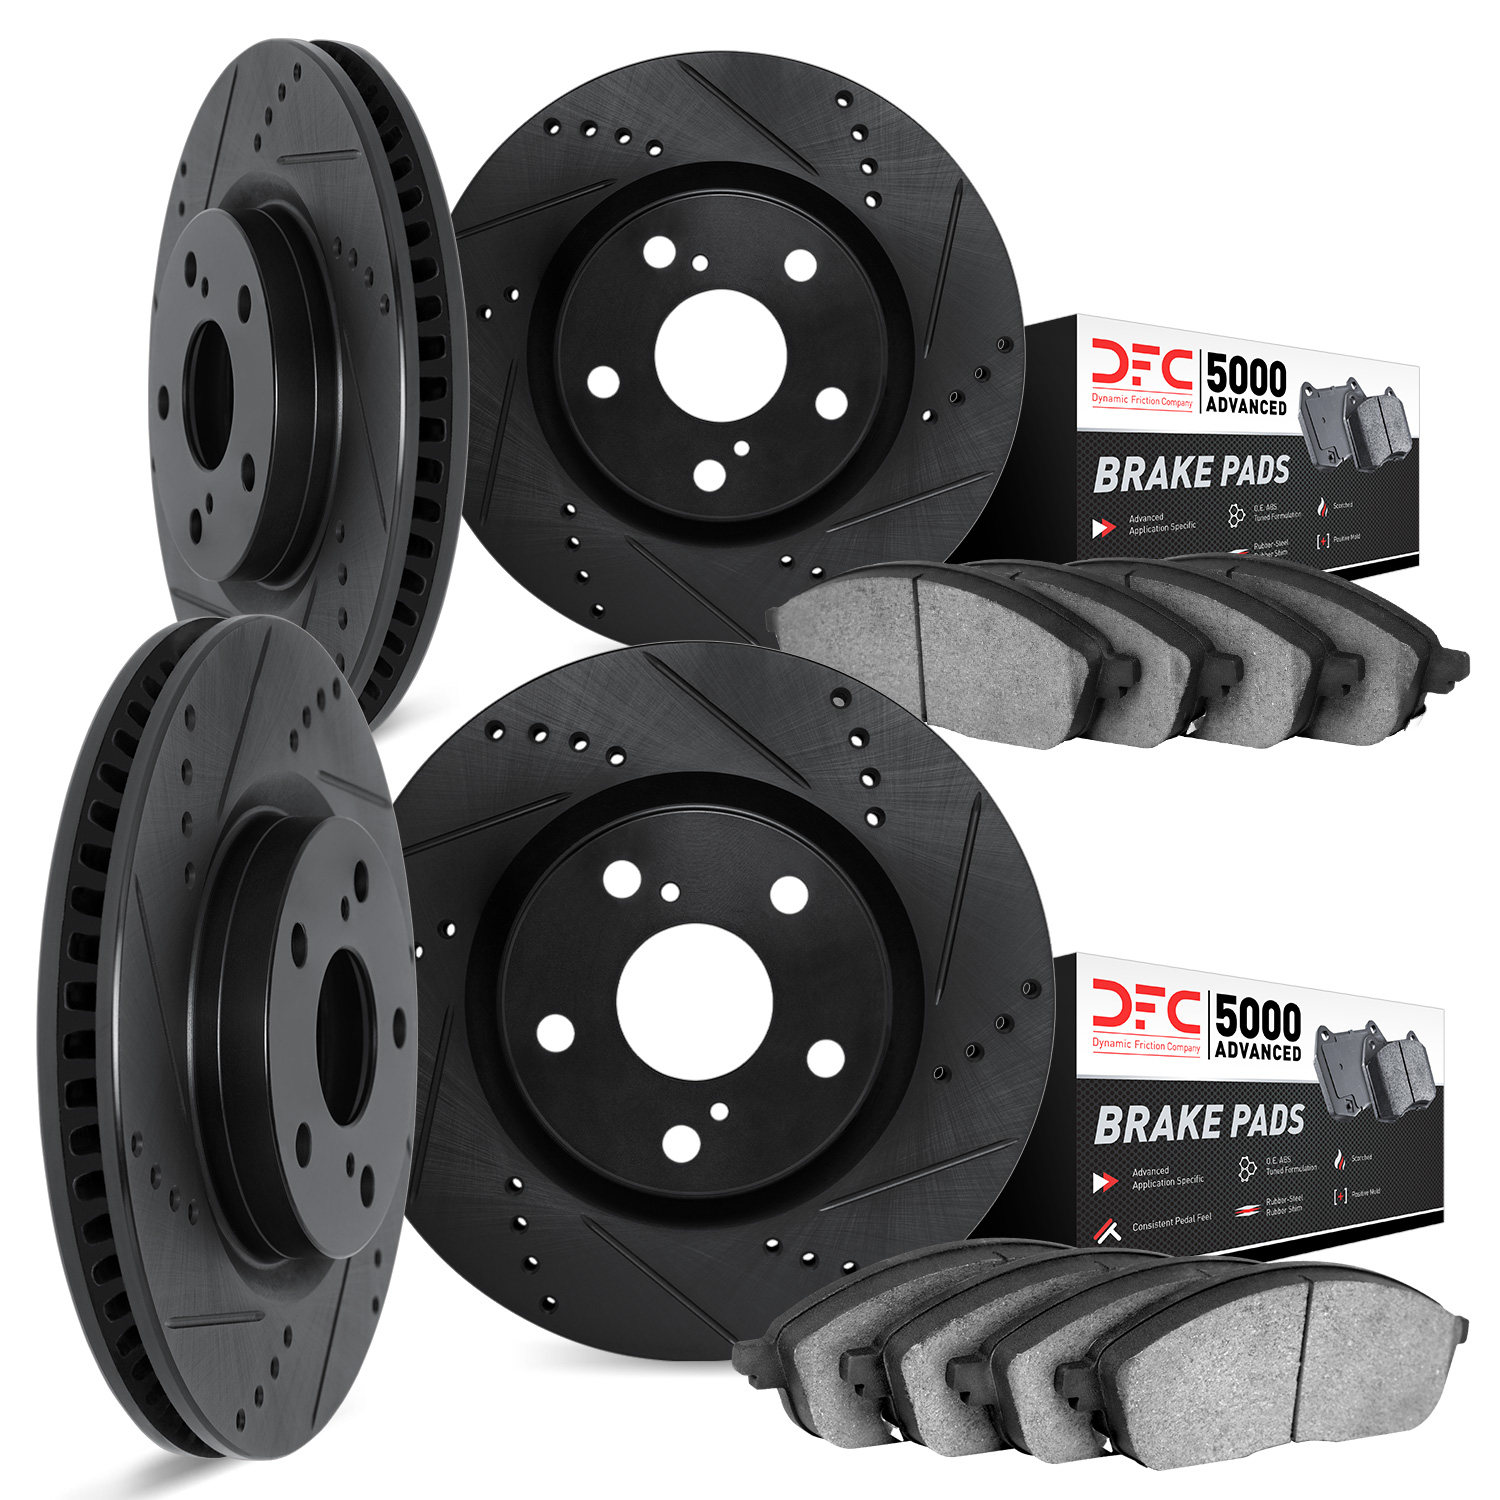 8504-63006 Drilled/Slotted Brake Rotors w/5000 Advanced Brake Pads Kit [Black], 2019-2019 Mercedes-Benz, Position: Front and Rea